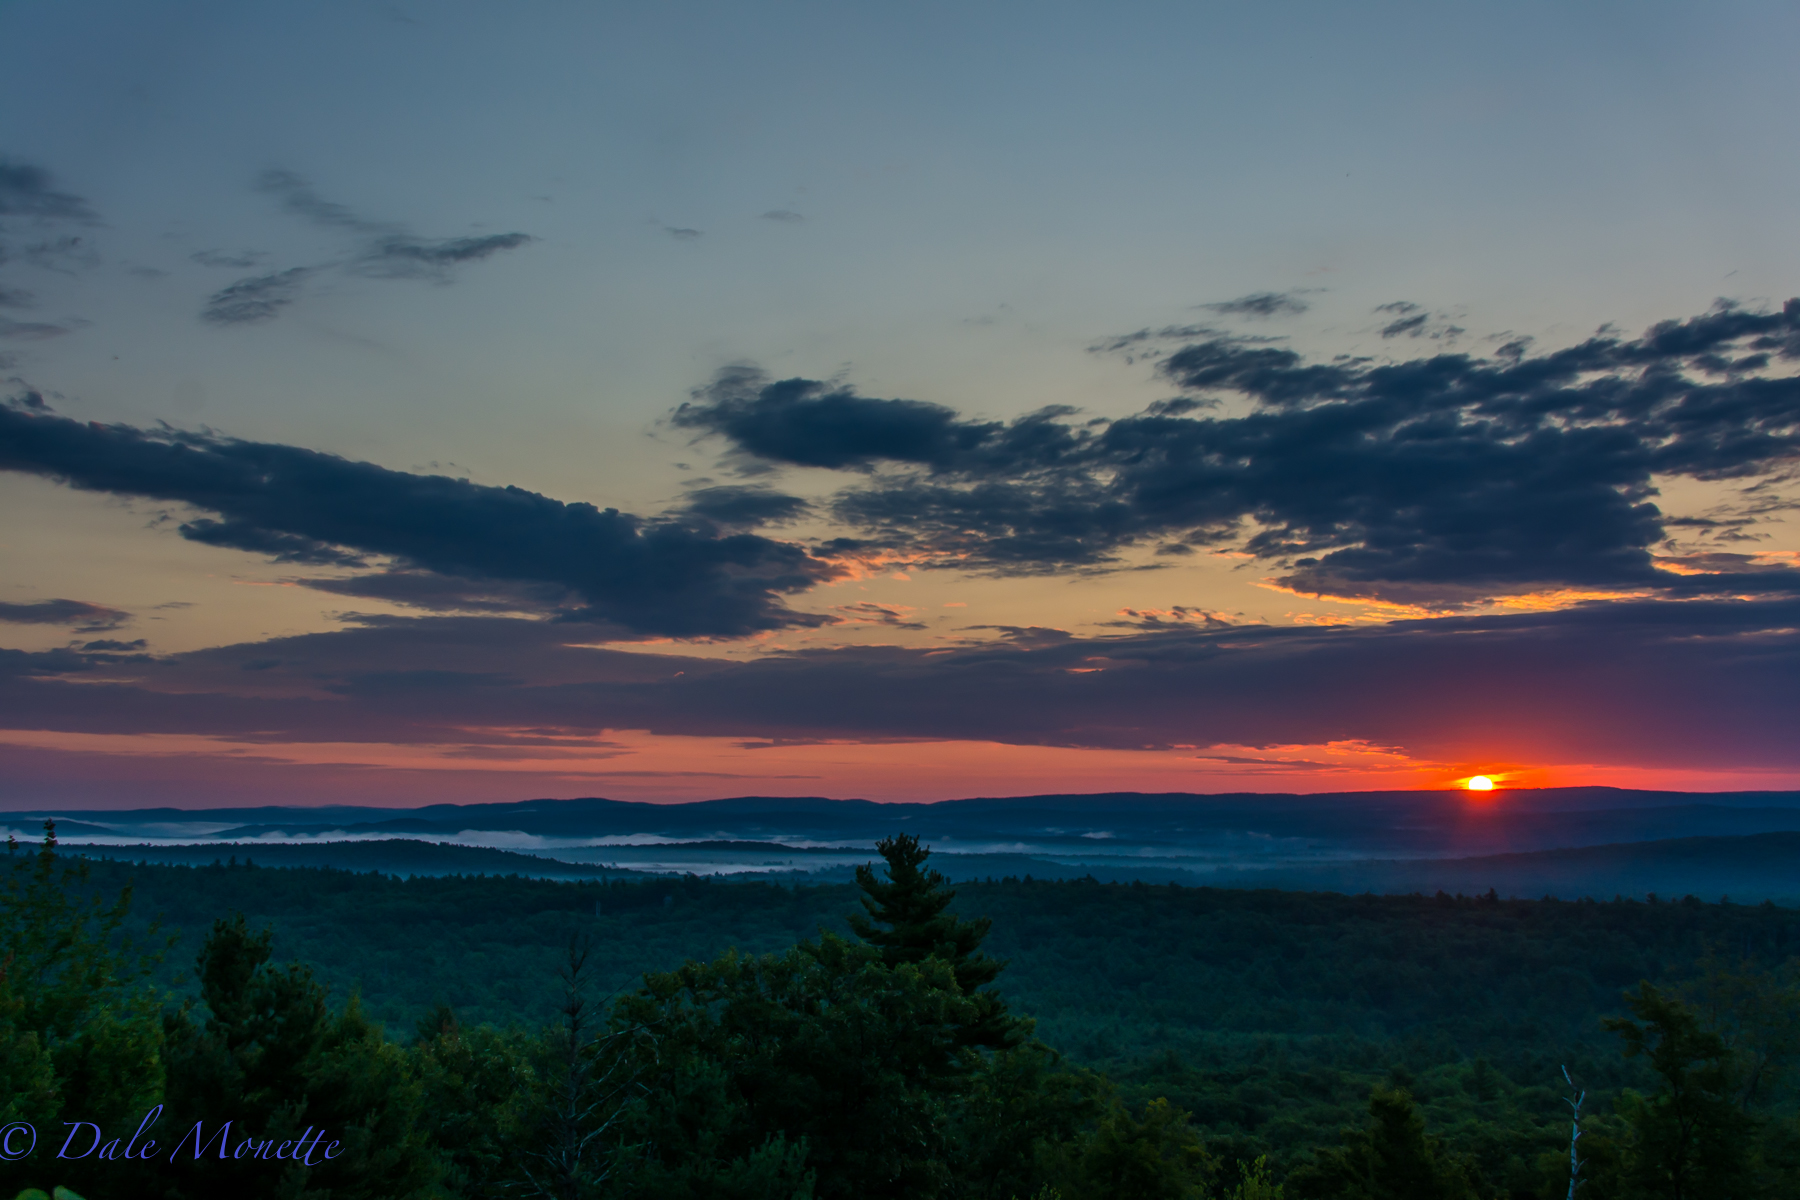 Sunrise looking towards Athol MA over north Quabbin area from the Route 202 lookout in New Salem.  8/15/15